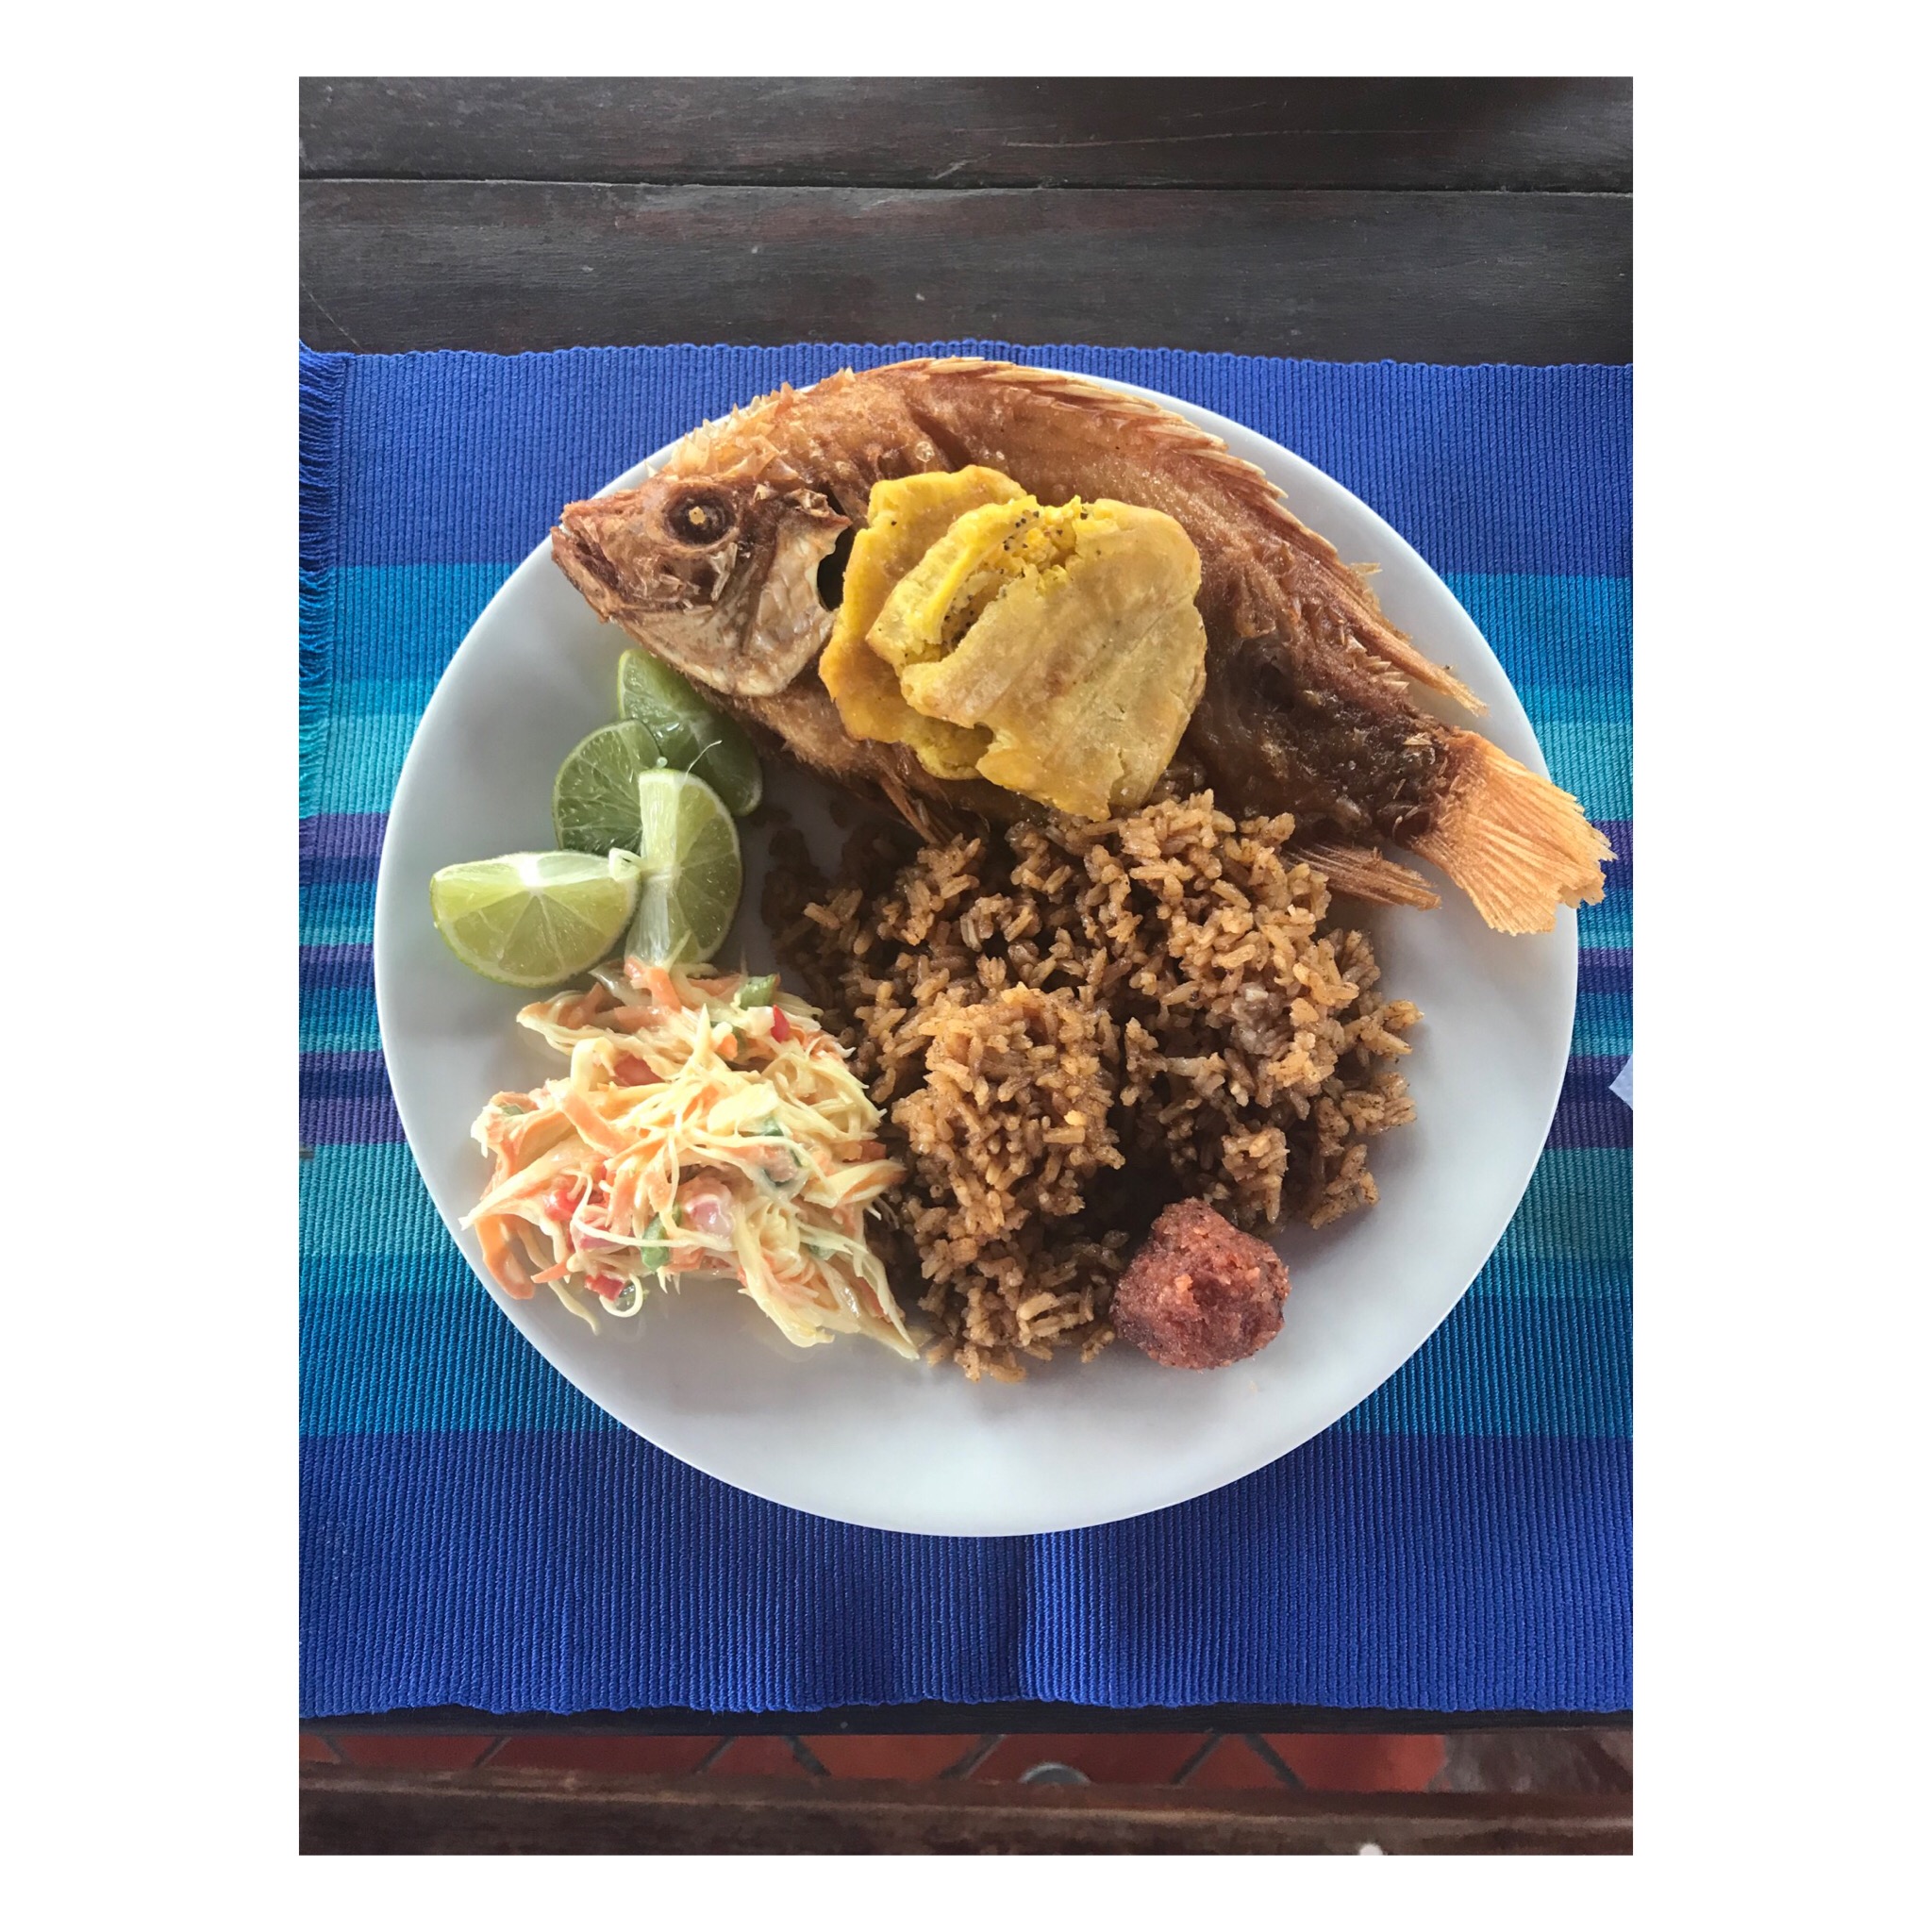 A traditional Caribbean lunch.